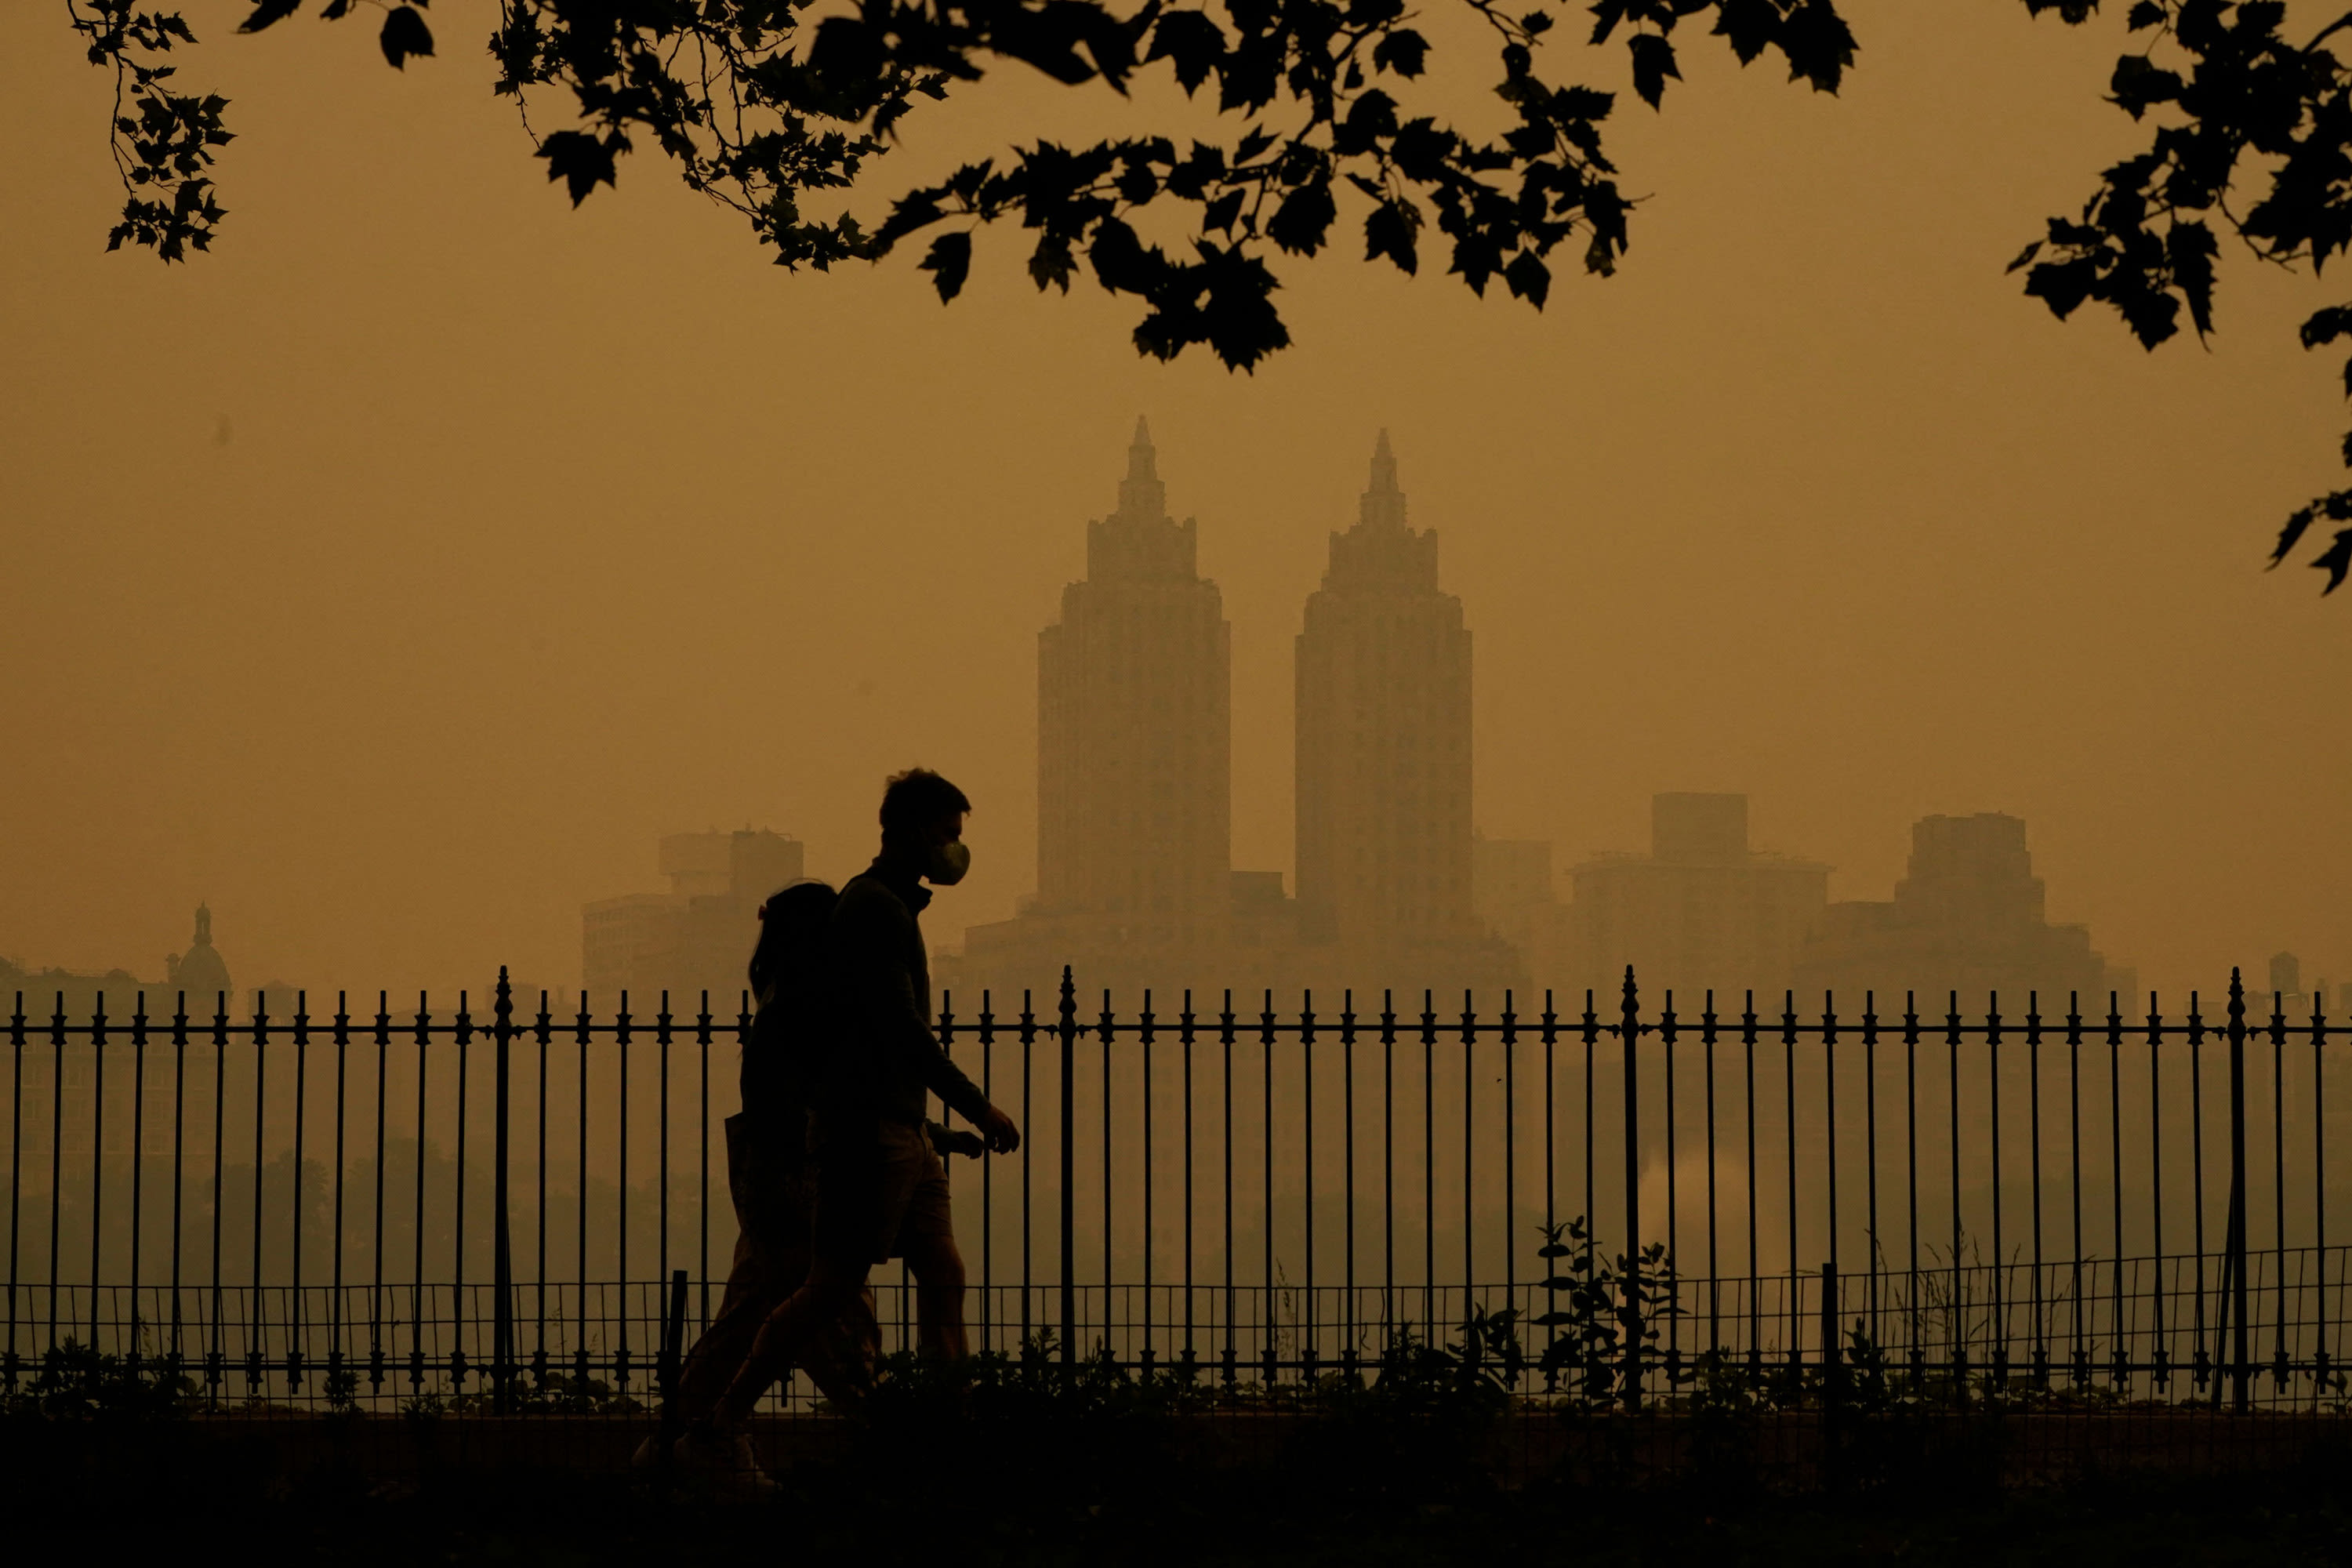 NYC, bracing for another round of Canadian wildfire smoke this summer, works on response